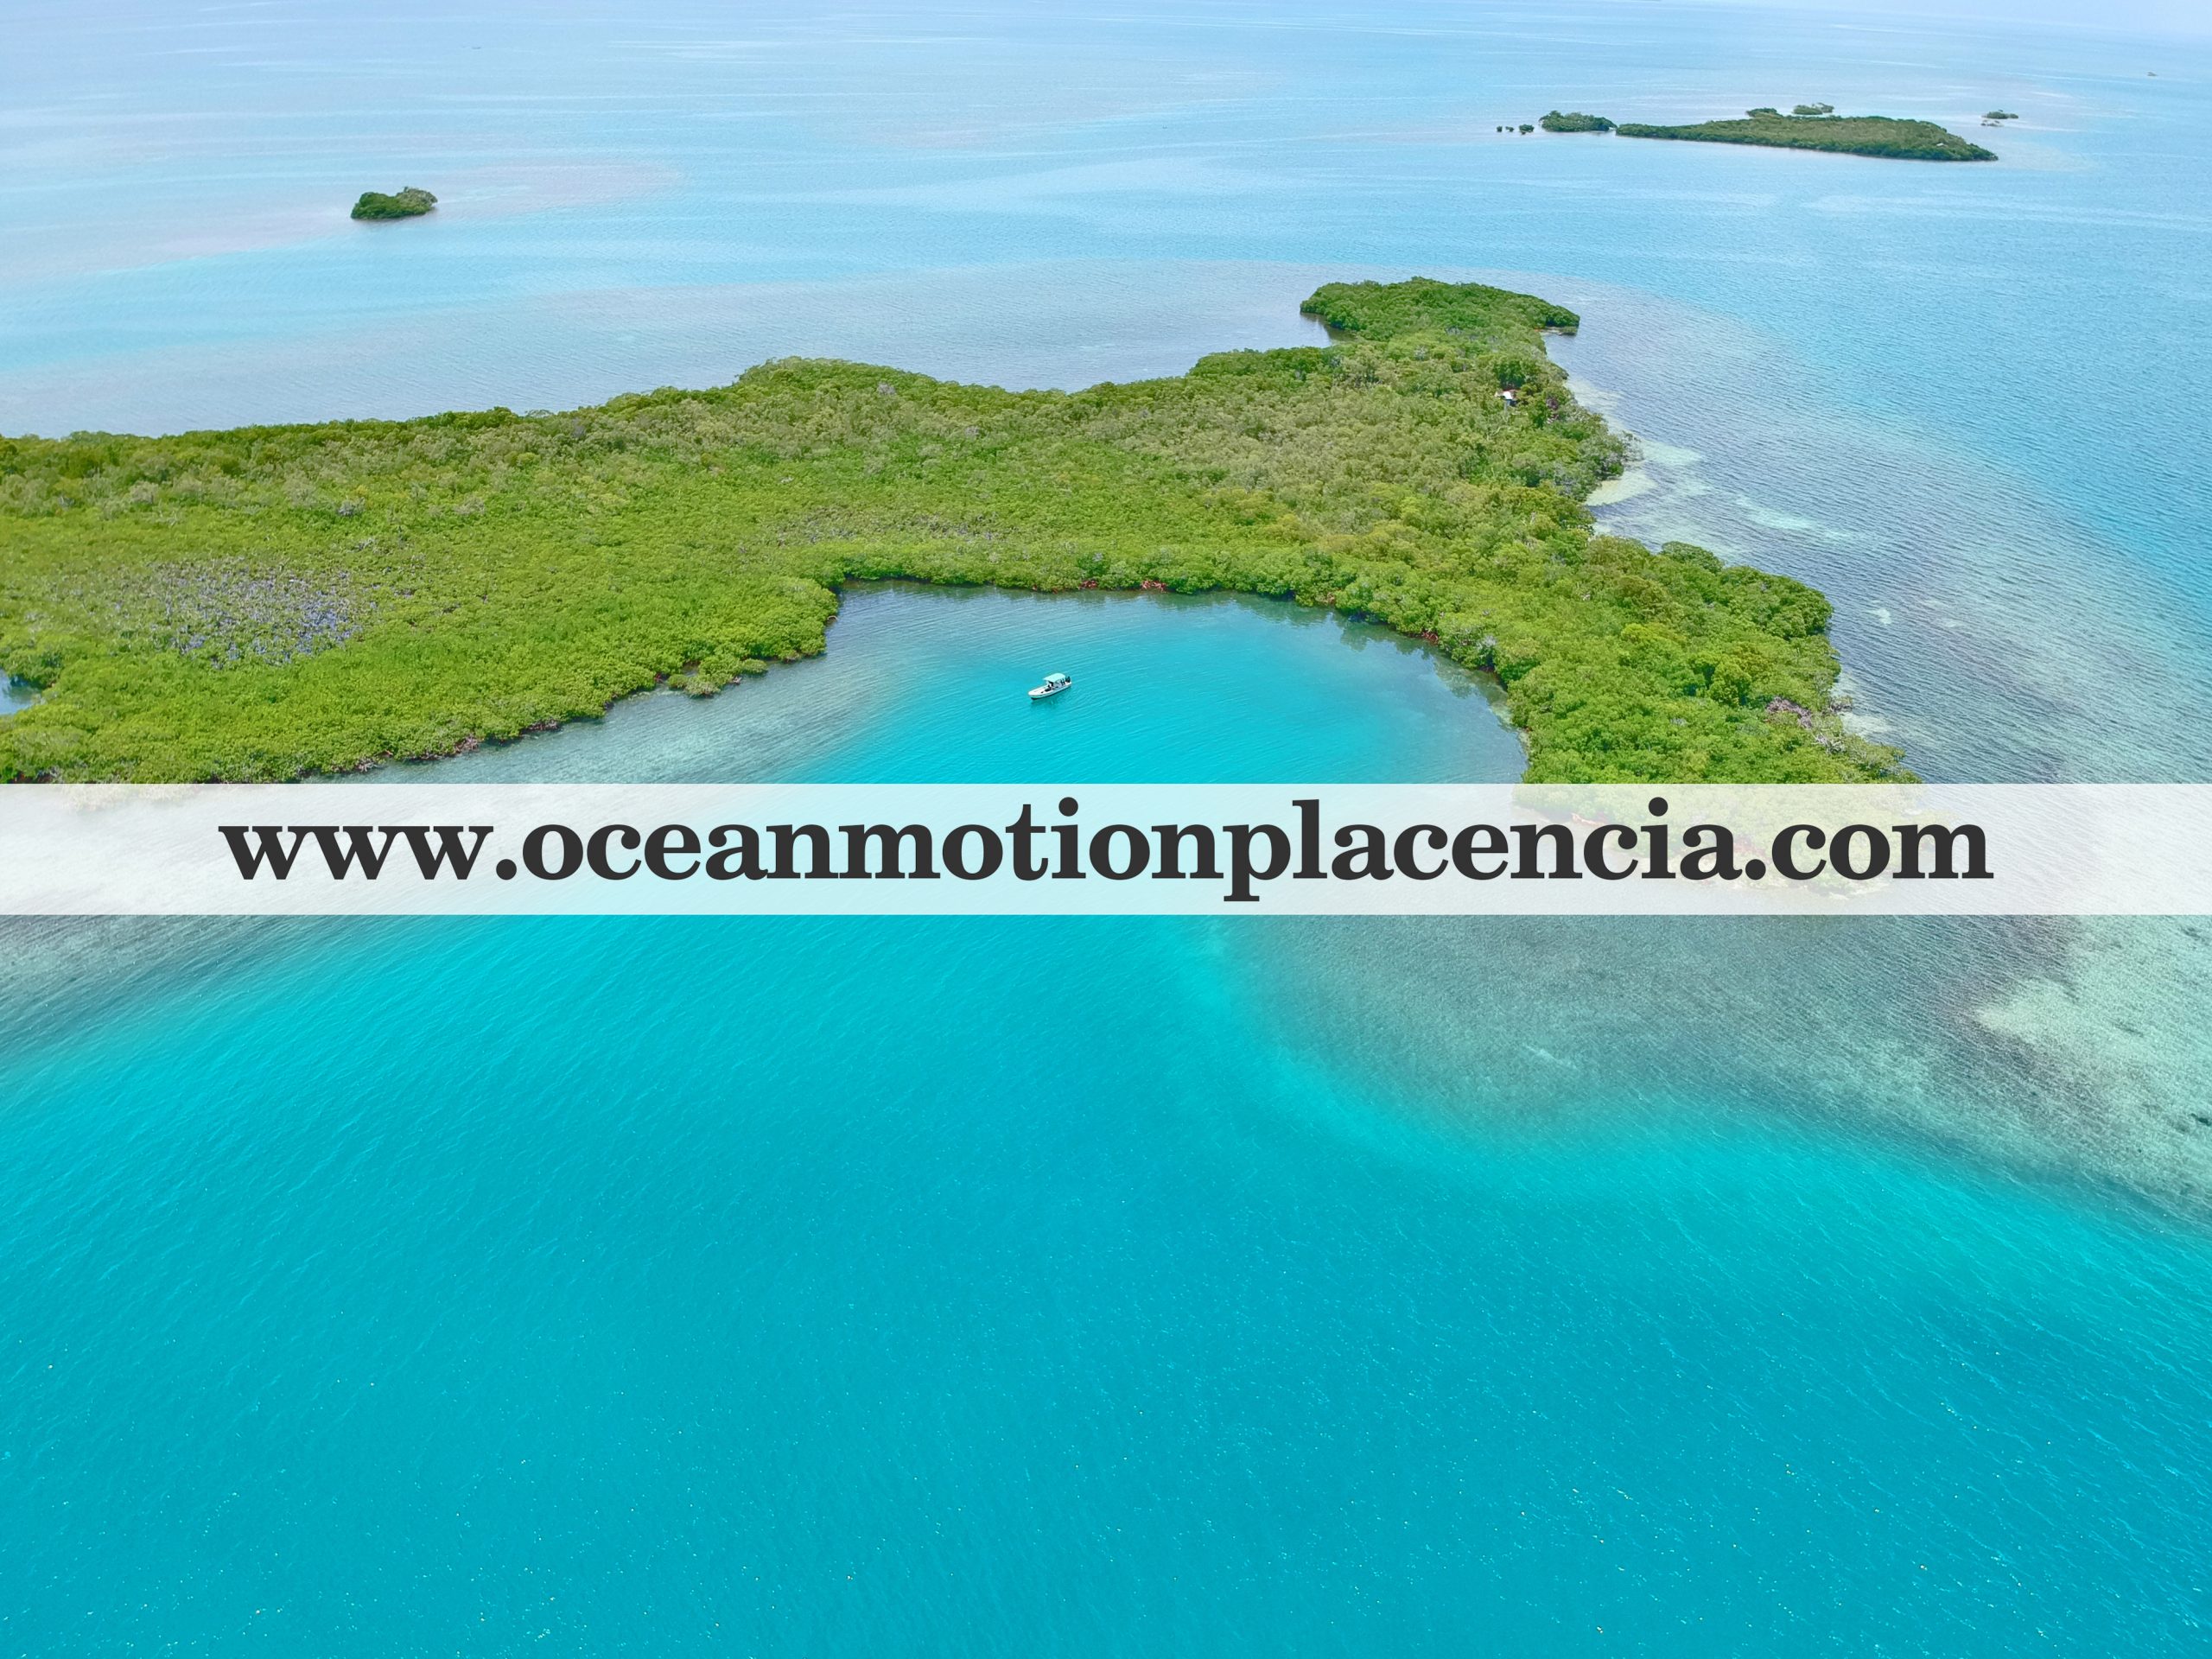 6.7 ACRES OF PRIVATE ISLAND PROPERTY